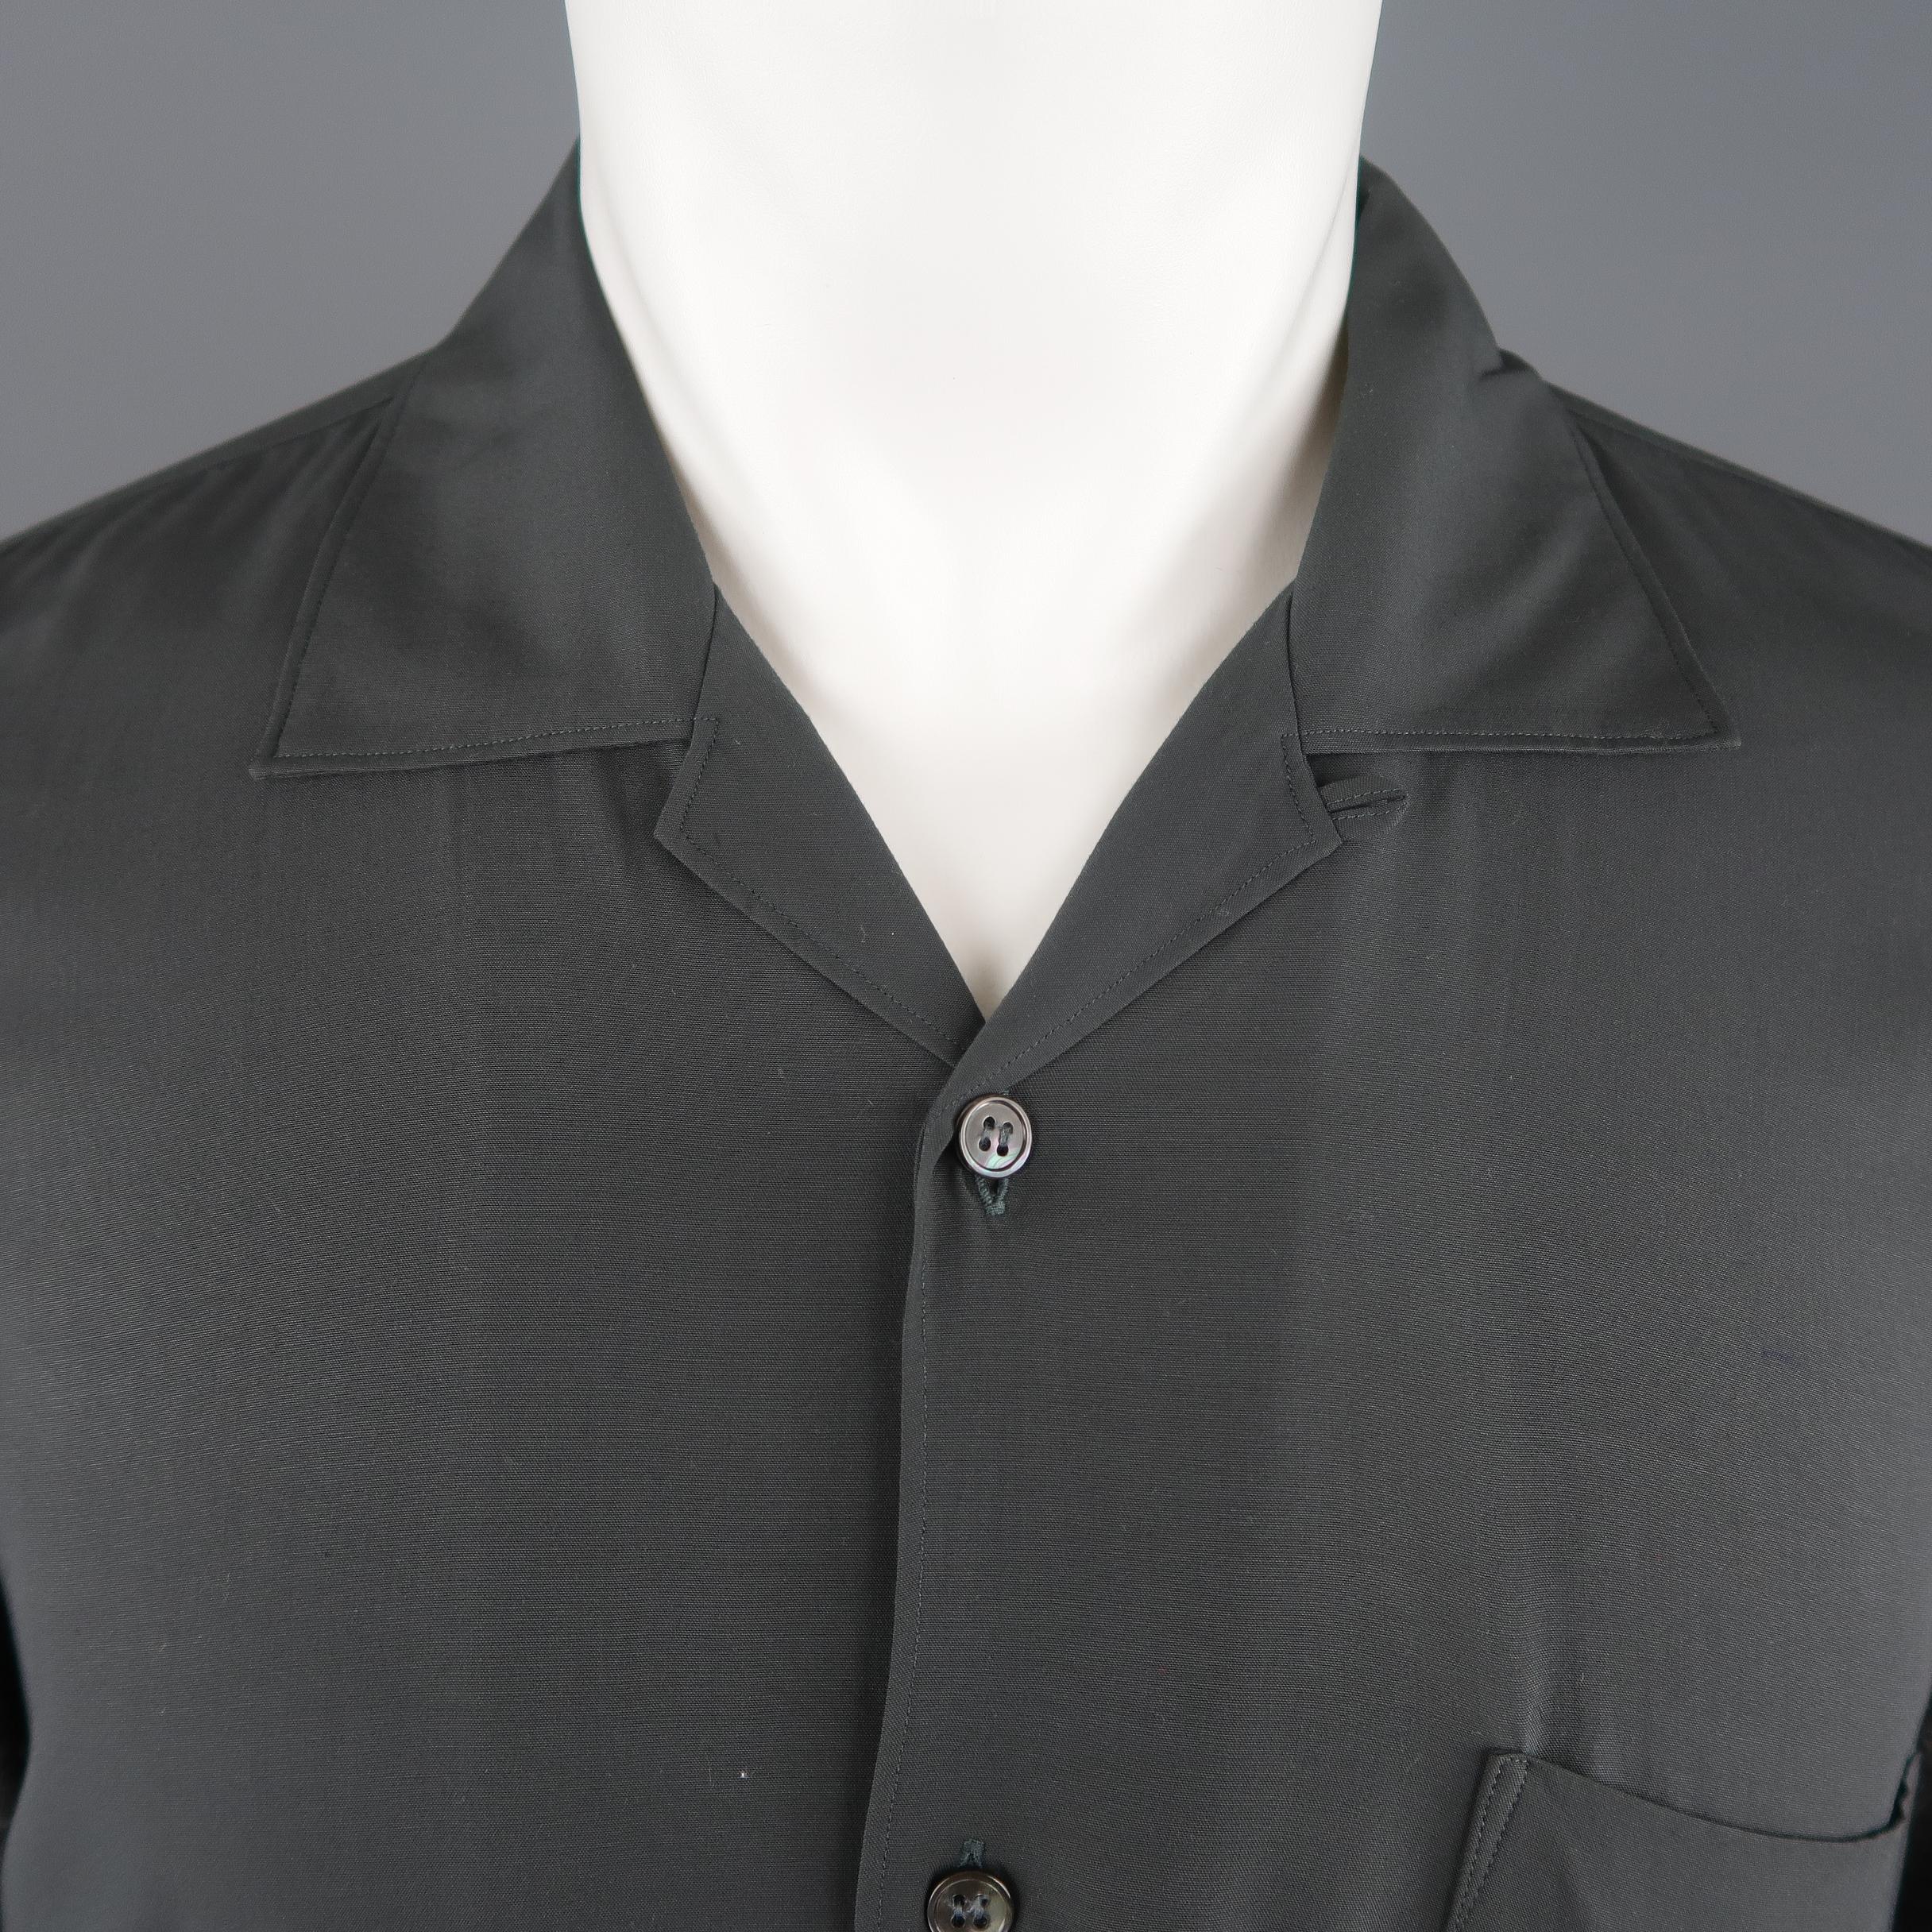 COMME des GARCONS shirt features a slate gray rayon body with a breast pocket and open collar with dark heather gray wool blend knit sleeves. Made in France.
 
Excellent Pre-Owned Condition.
Marked: M
 
Measurements:
 
Shoulder: 18 in.
Chest: 46